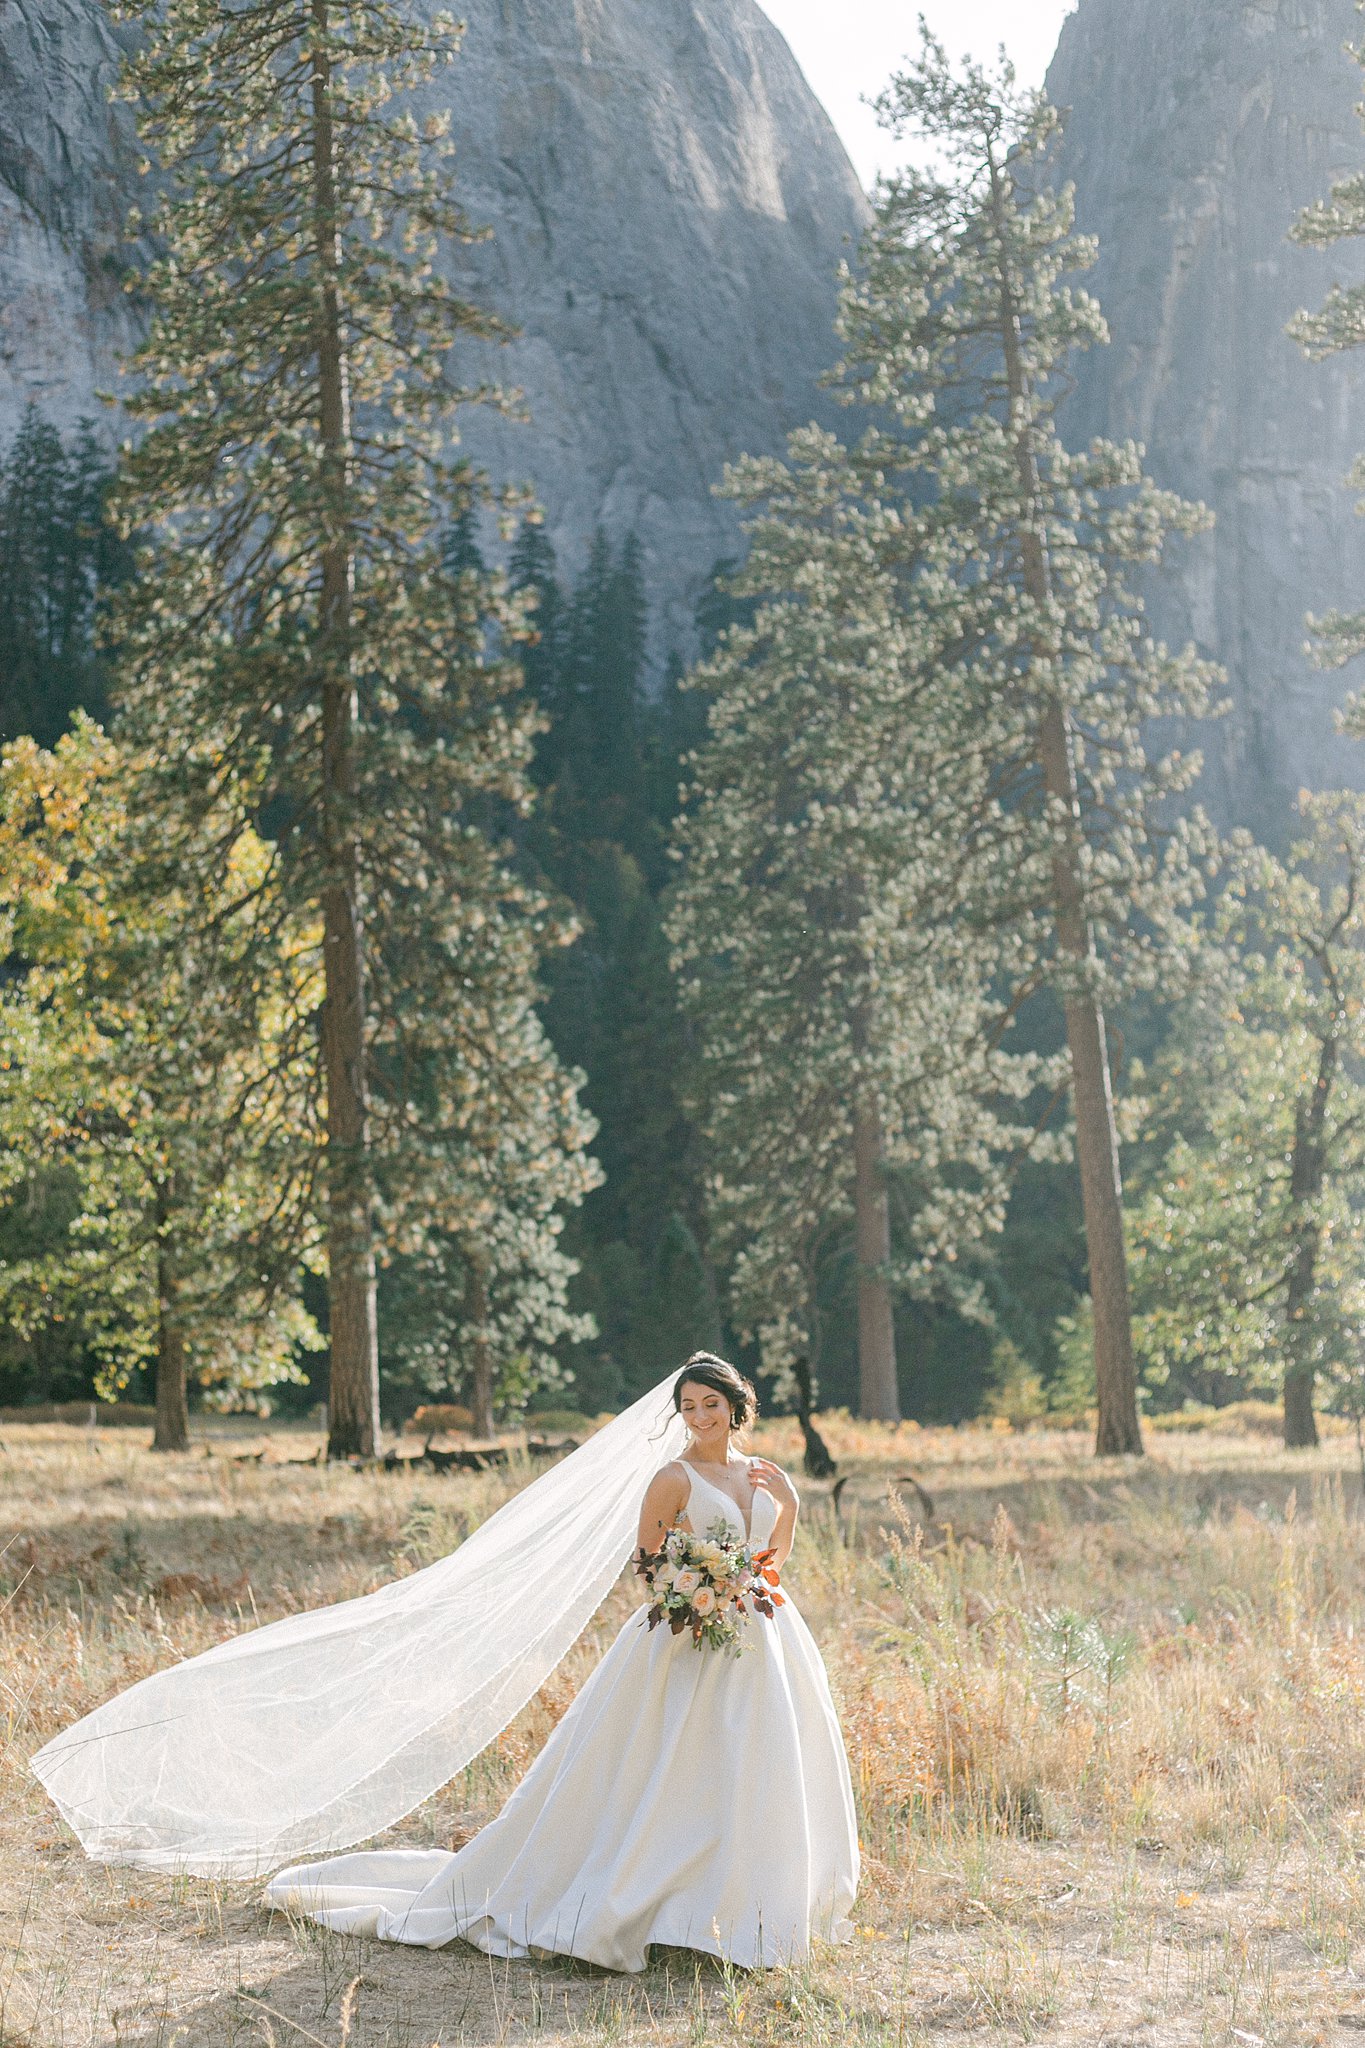 Fall Yosemite Vow Renewal Cook's Meadow 9